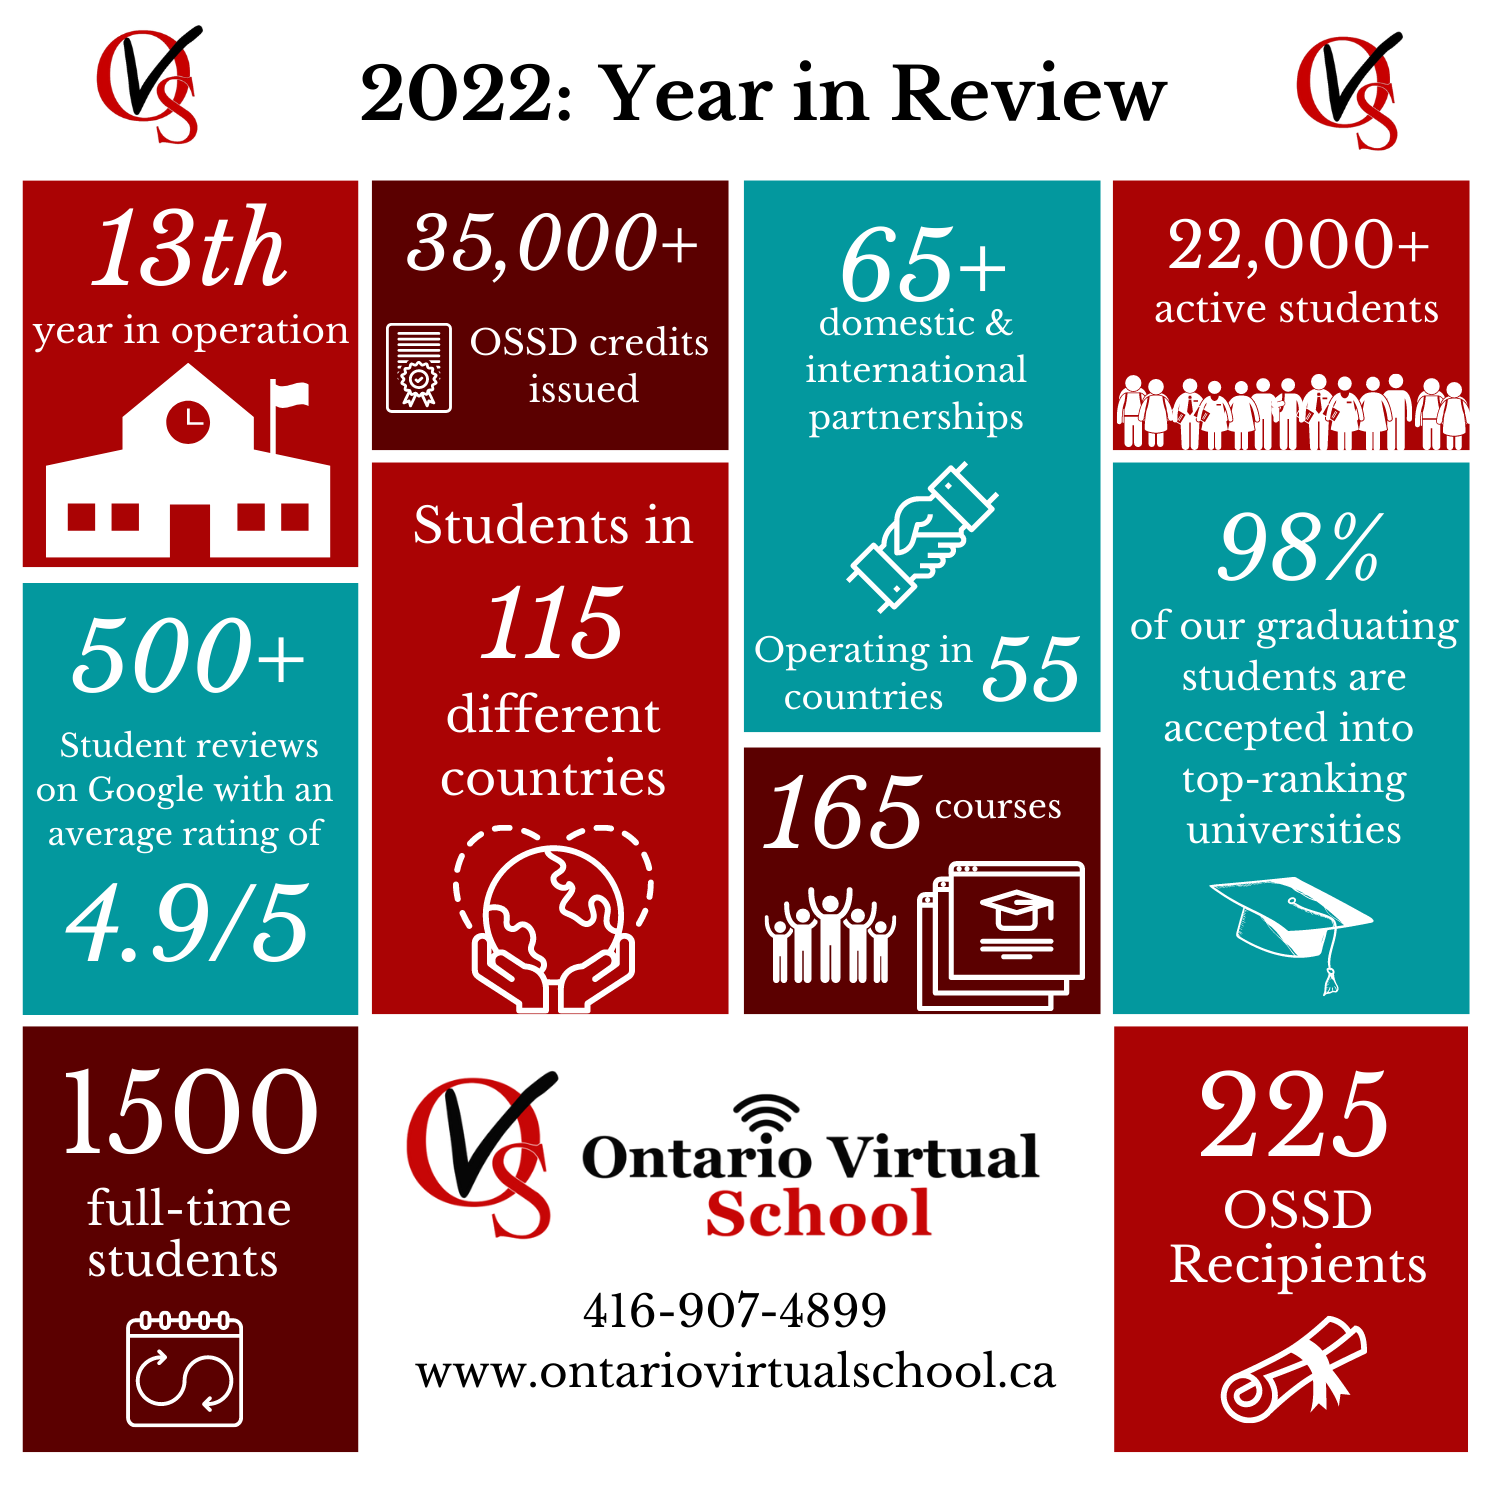 Copy of 2022 Year in Review UPDATED